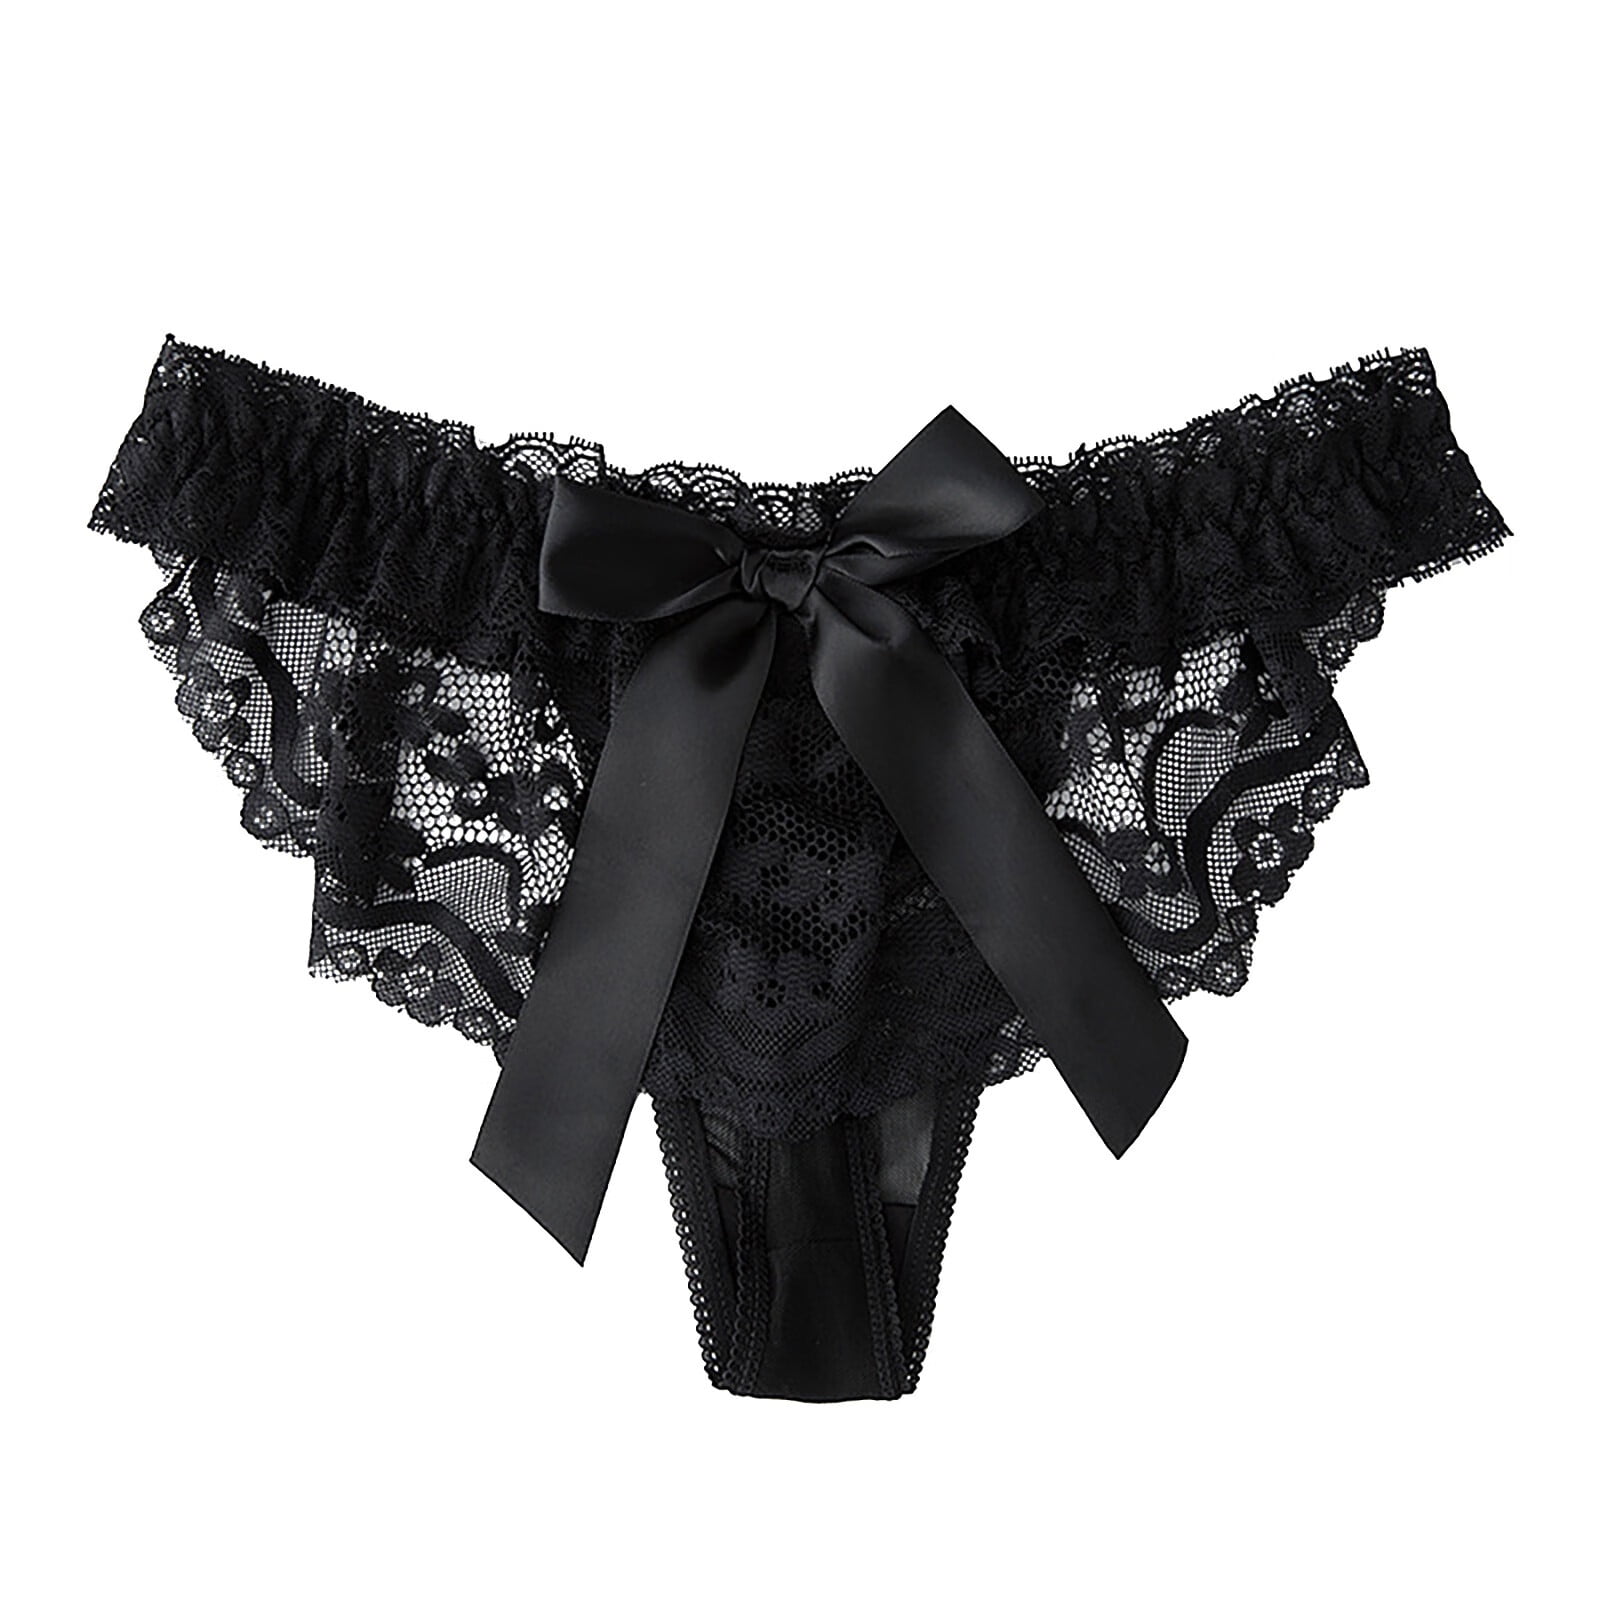 Yevin Plus Size Panties For Women Sexy Bow Lace Underwear Cute